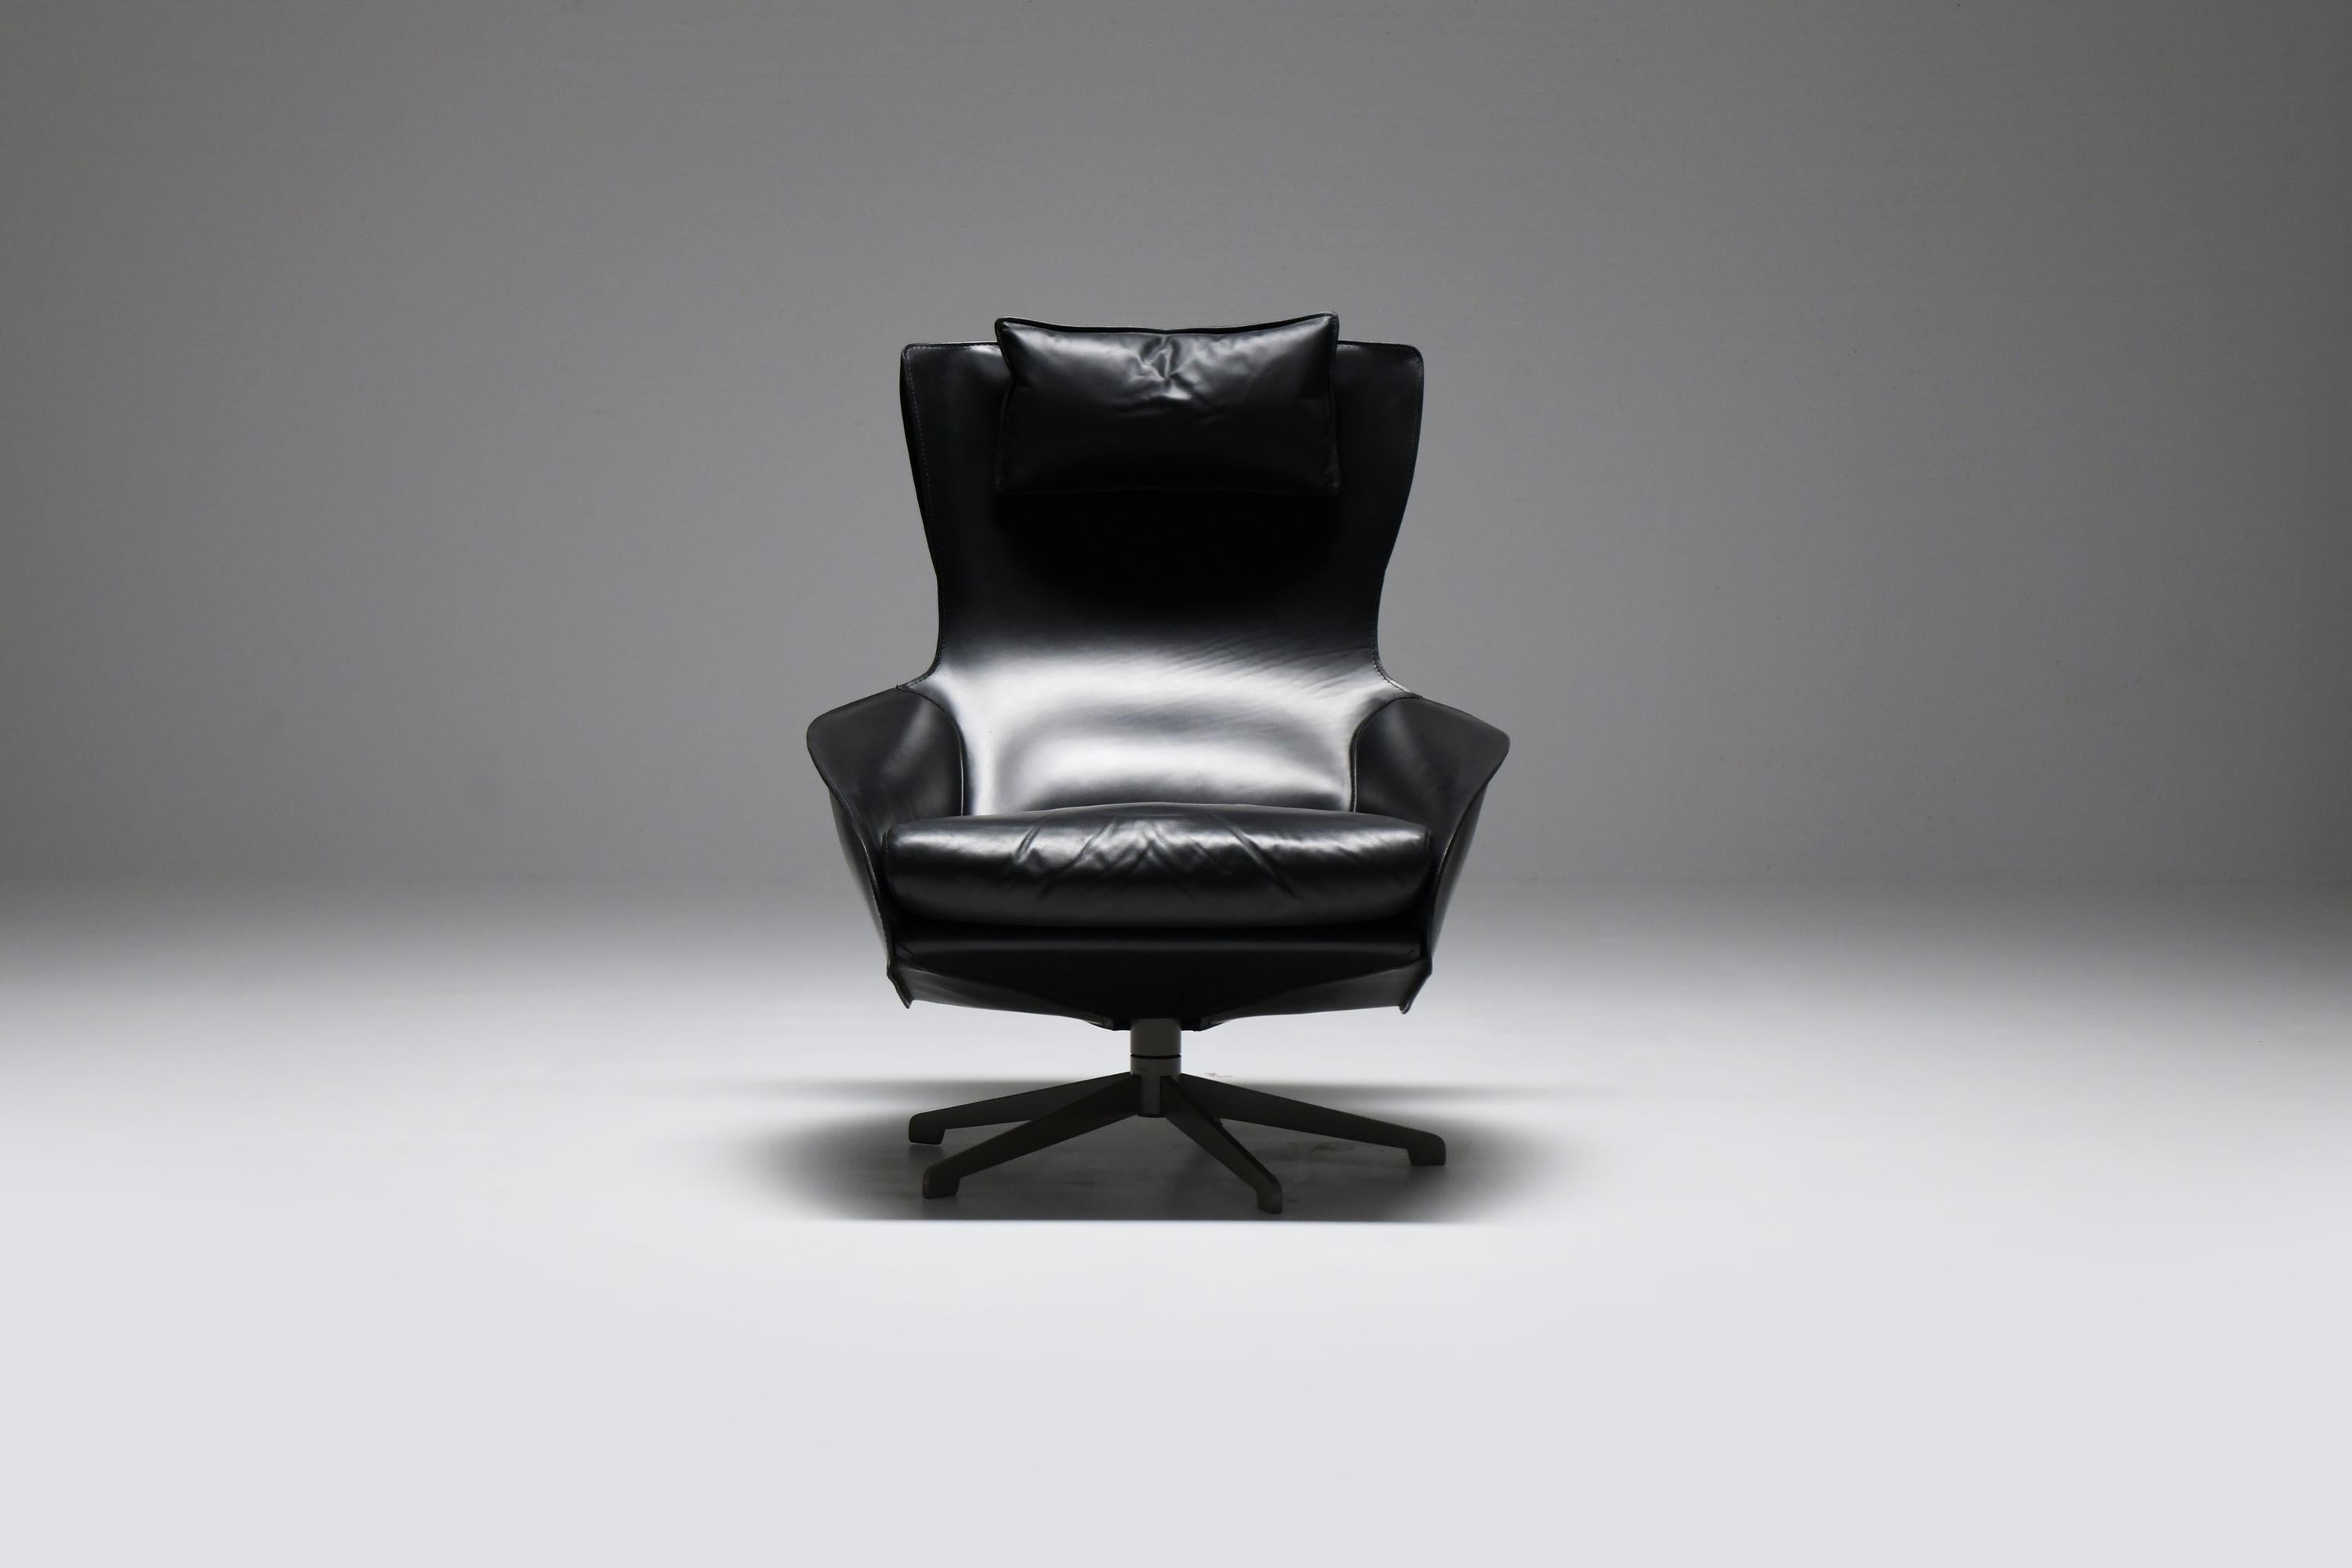 Perfect CAB 423 lounge chair by Mario Bellini for CASSINA Italy.

Cab Lounge epitomizes all of the Cassina expertise in leather upholstery: the cowhide fits the tubular steel like a custom-tailored garment, defining its generous, inviting